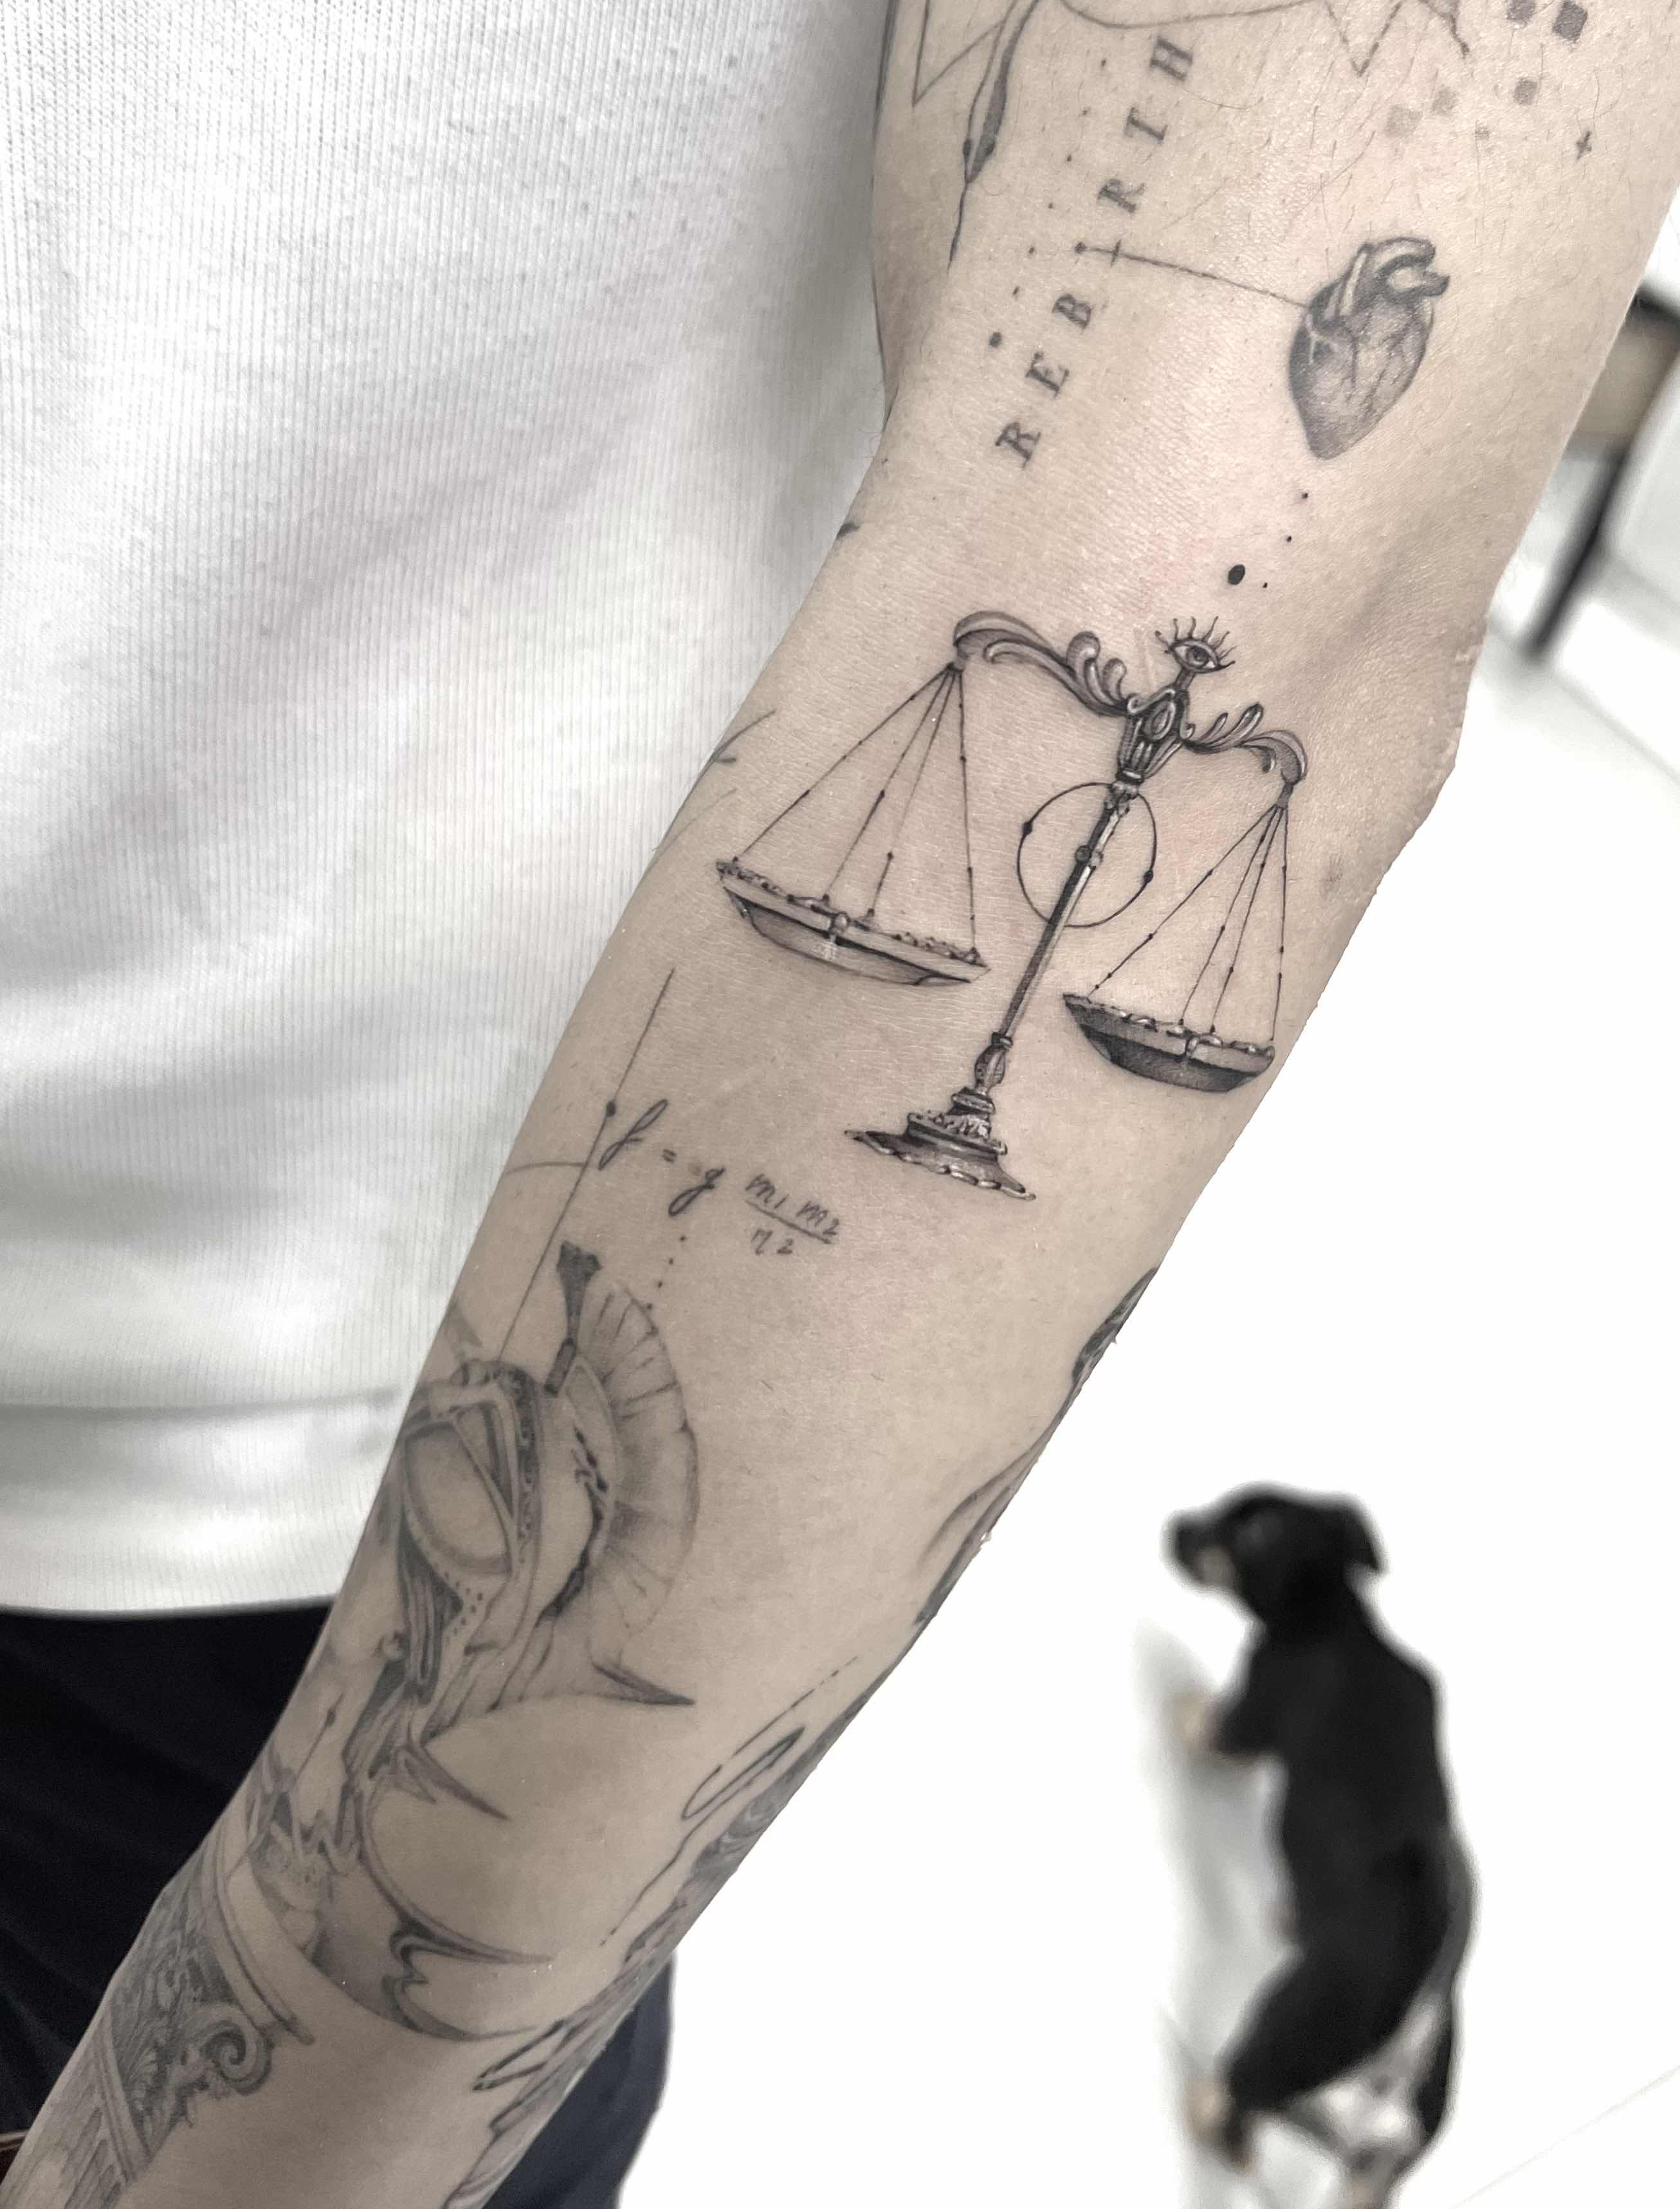 Libra Tattoo Ideas: Scales of Justice, Constellation, Wolves, & More